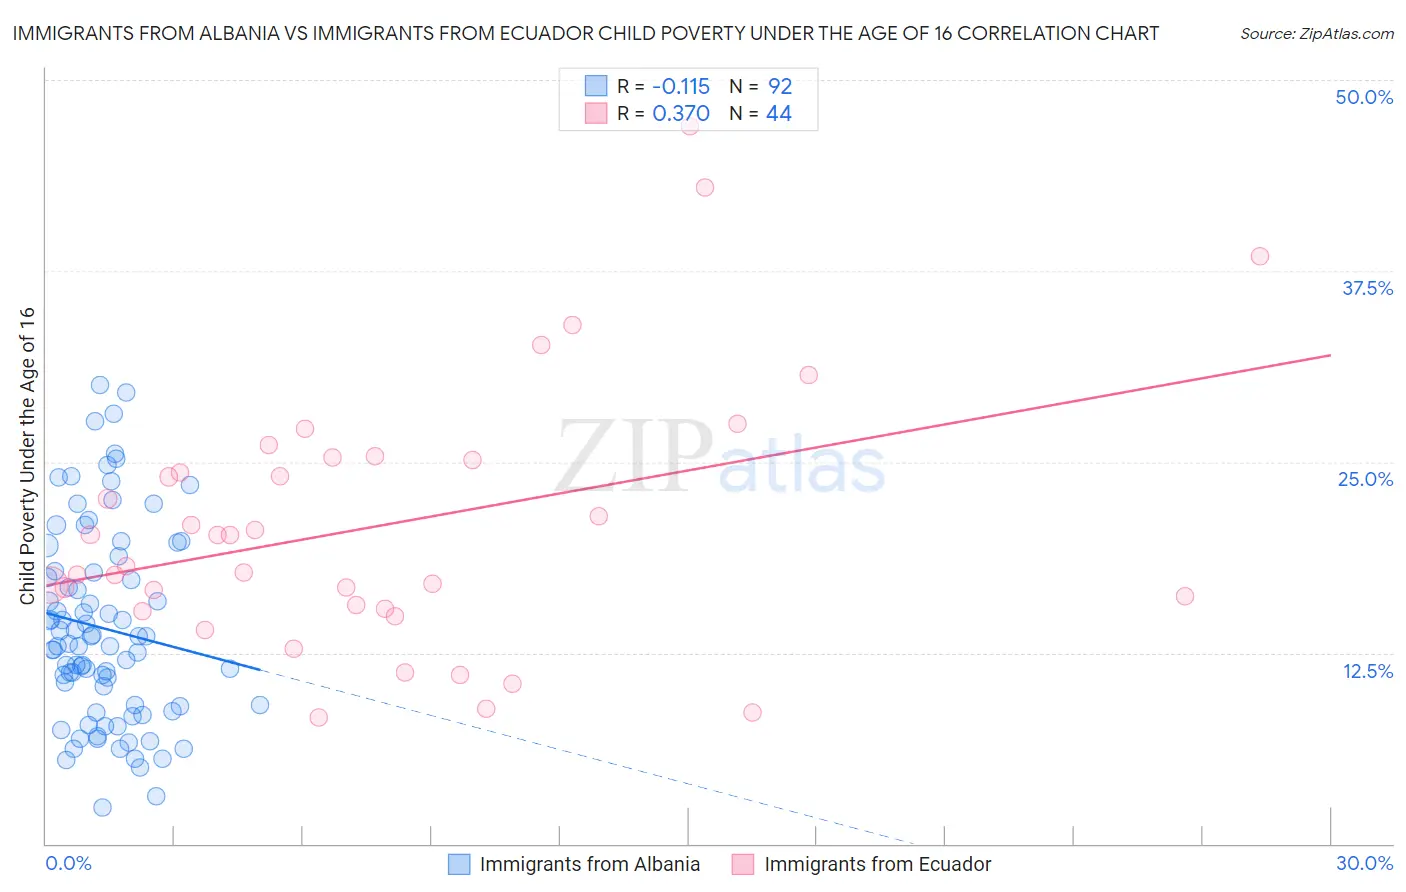 Immigrants from Albania vs Immigrants from Ecuador Child Poverty Under the Age of 16